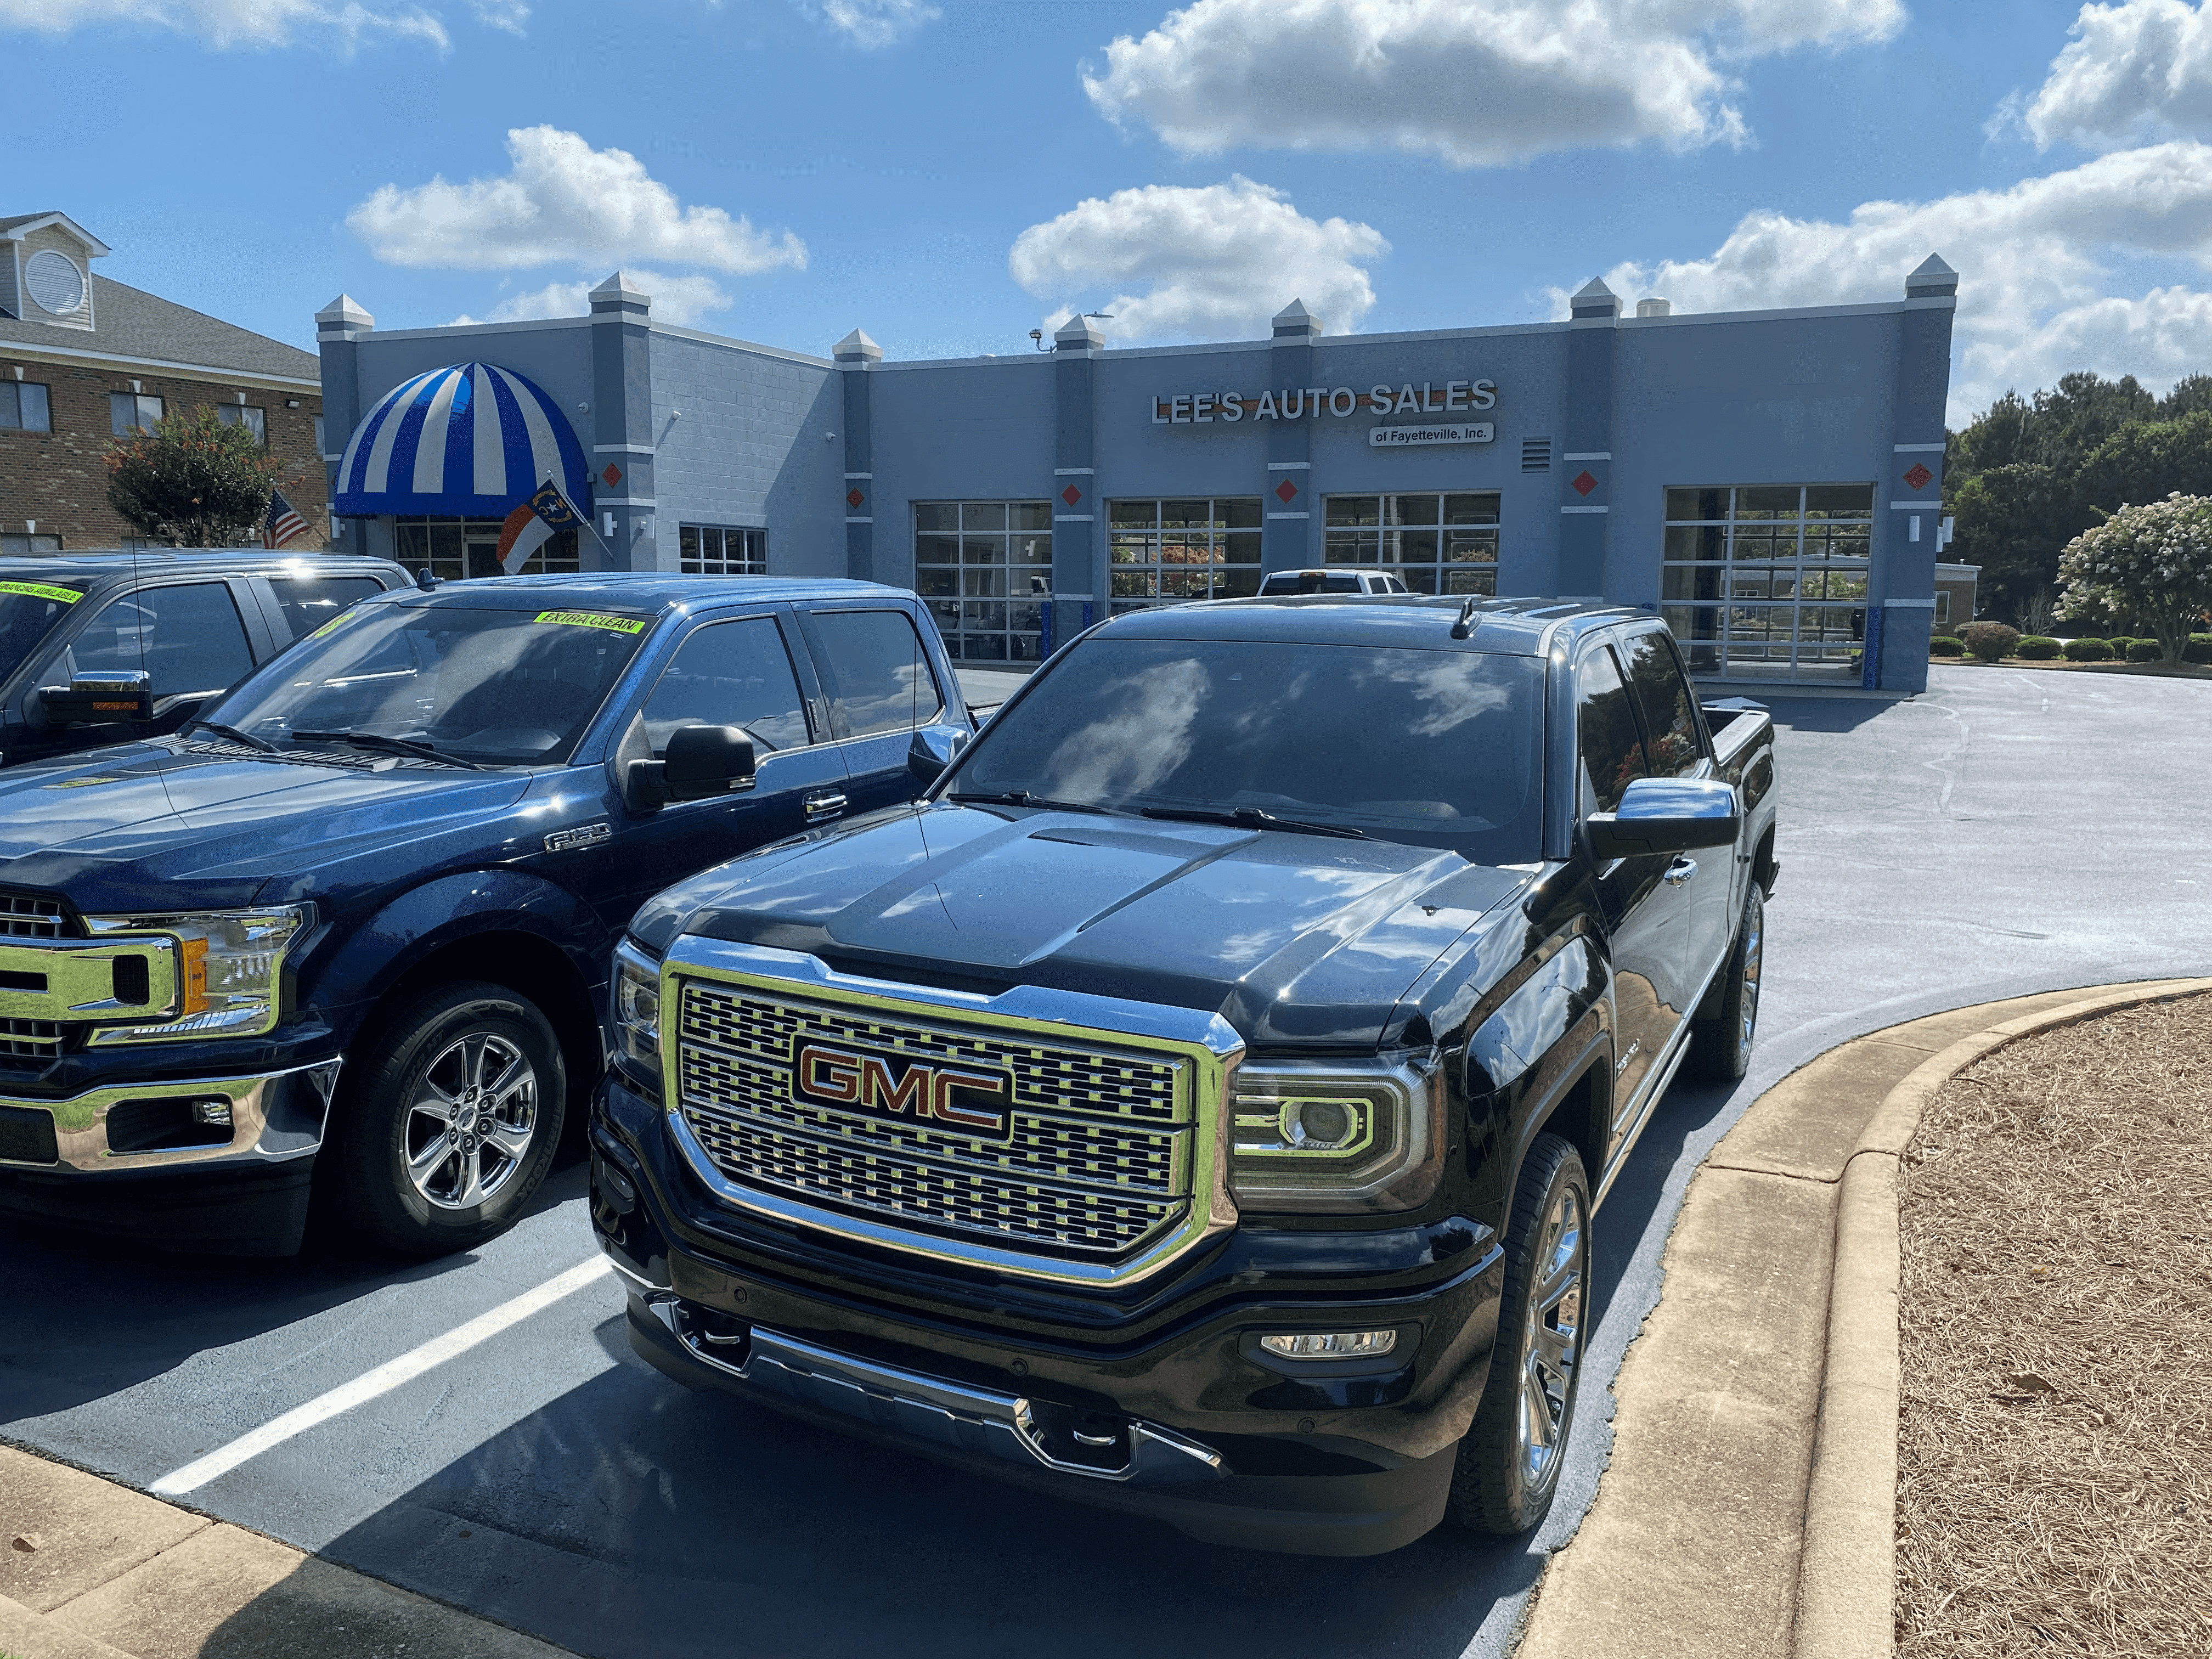 Lee's Auto Sales of Fayetteville Inc